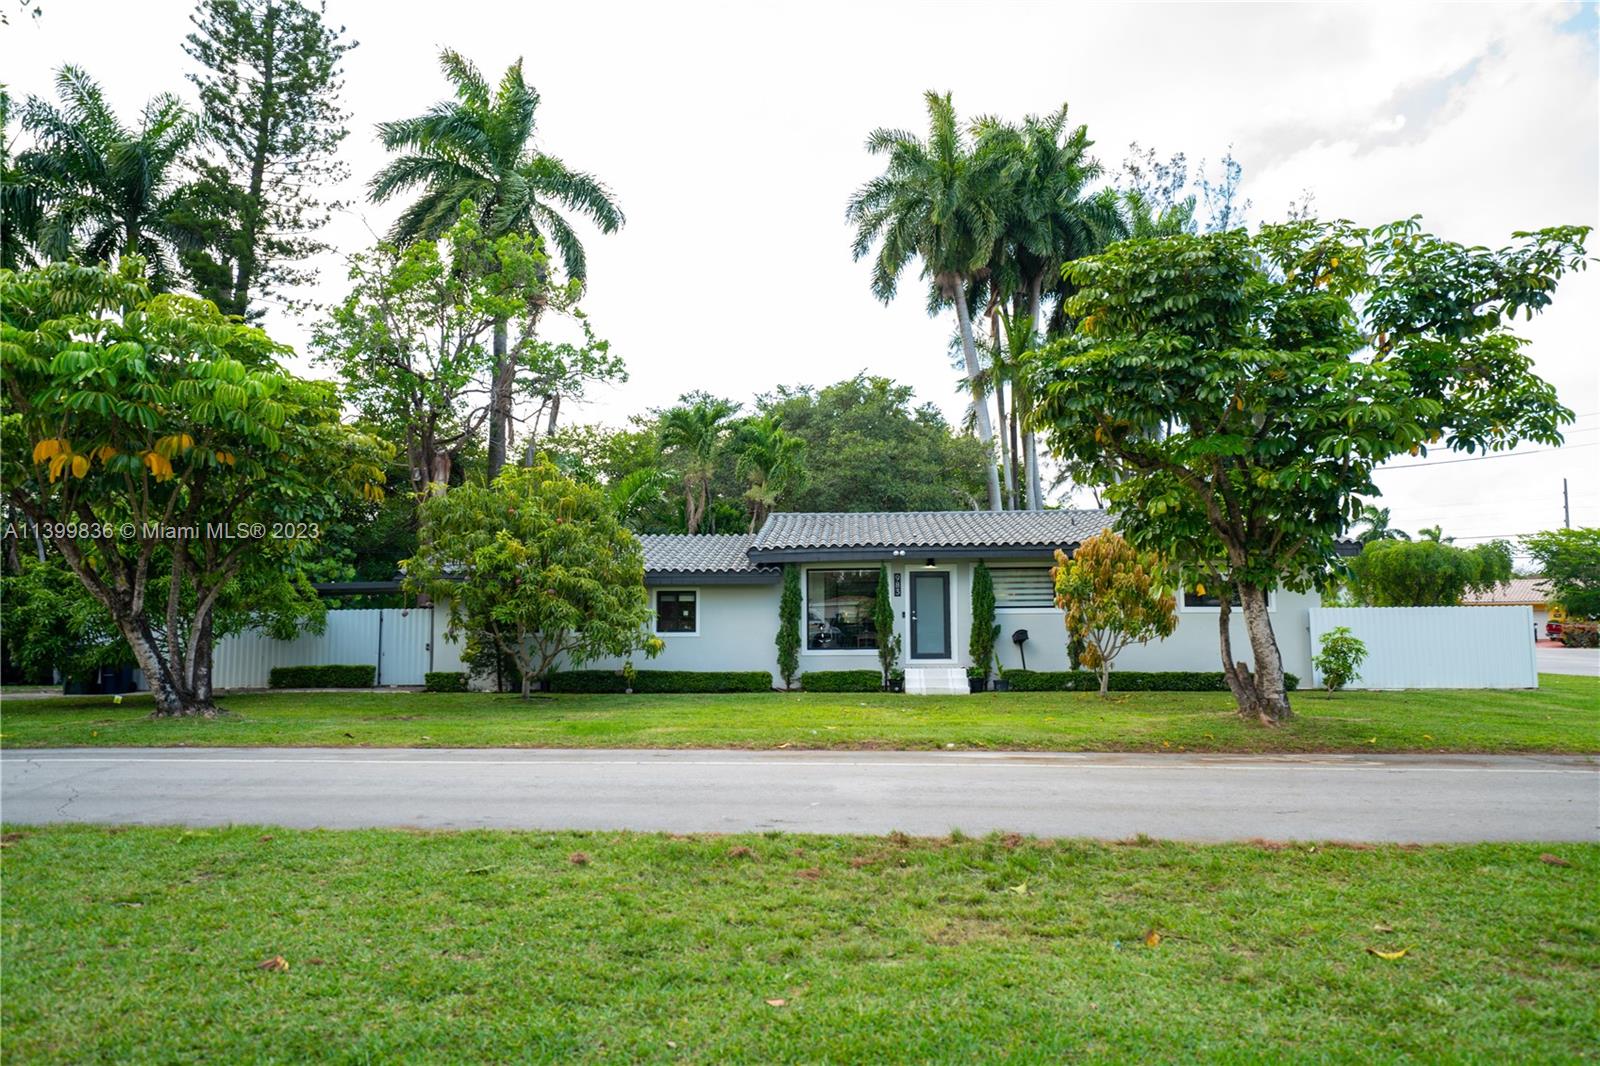 a view of a house with a big yard and palm trees